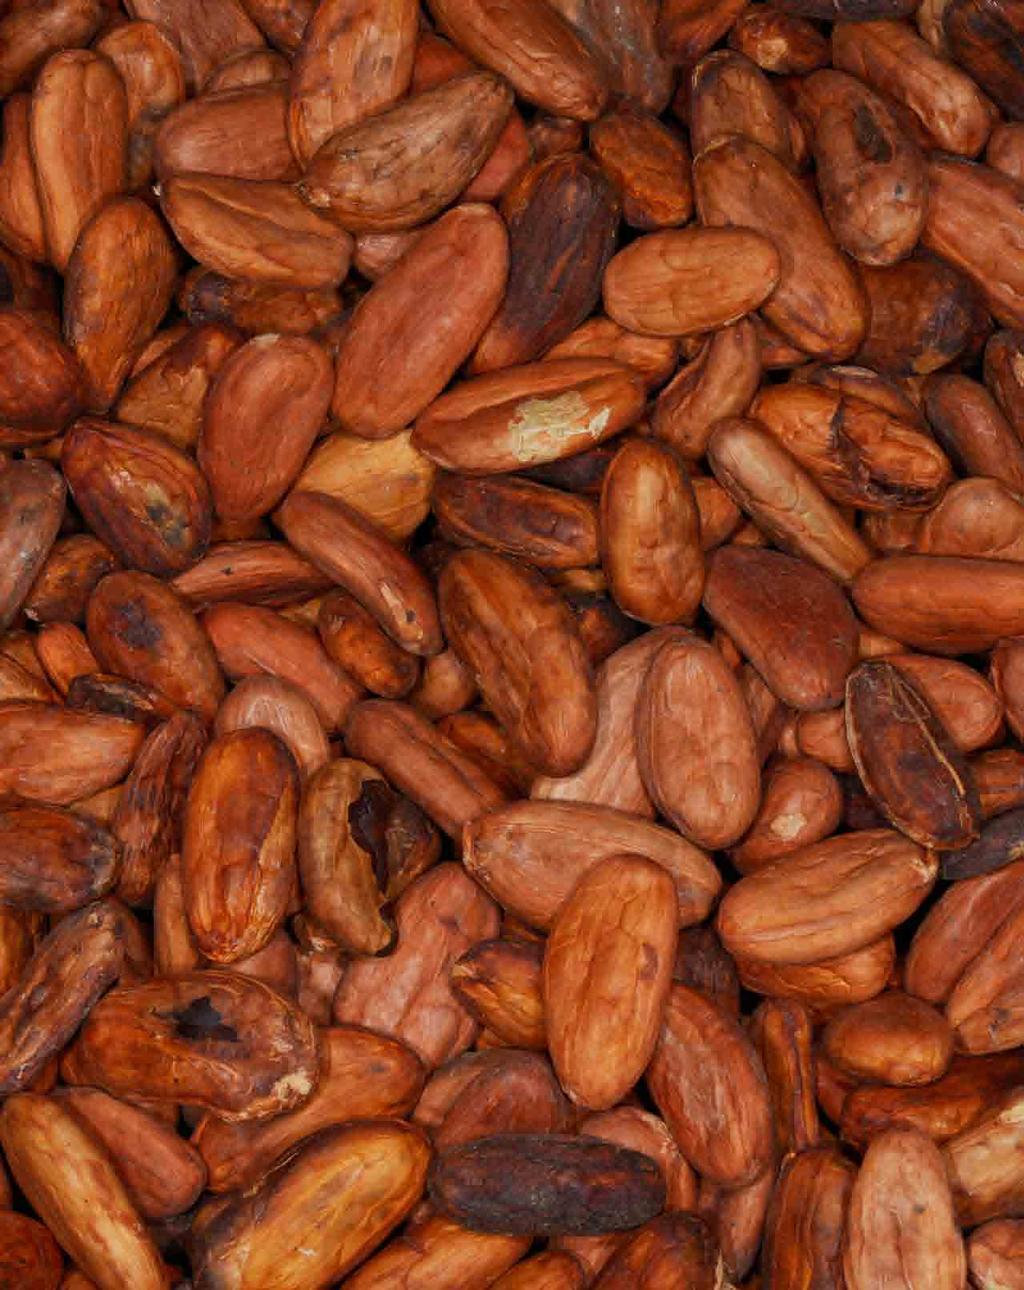 The plants below are primarily seeds of trees, or vines (Pepitorio). Seeds of grains are already listed previously, in a separate category, namely grains.